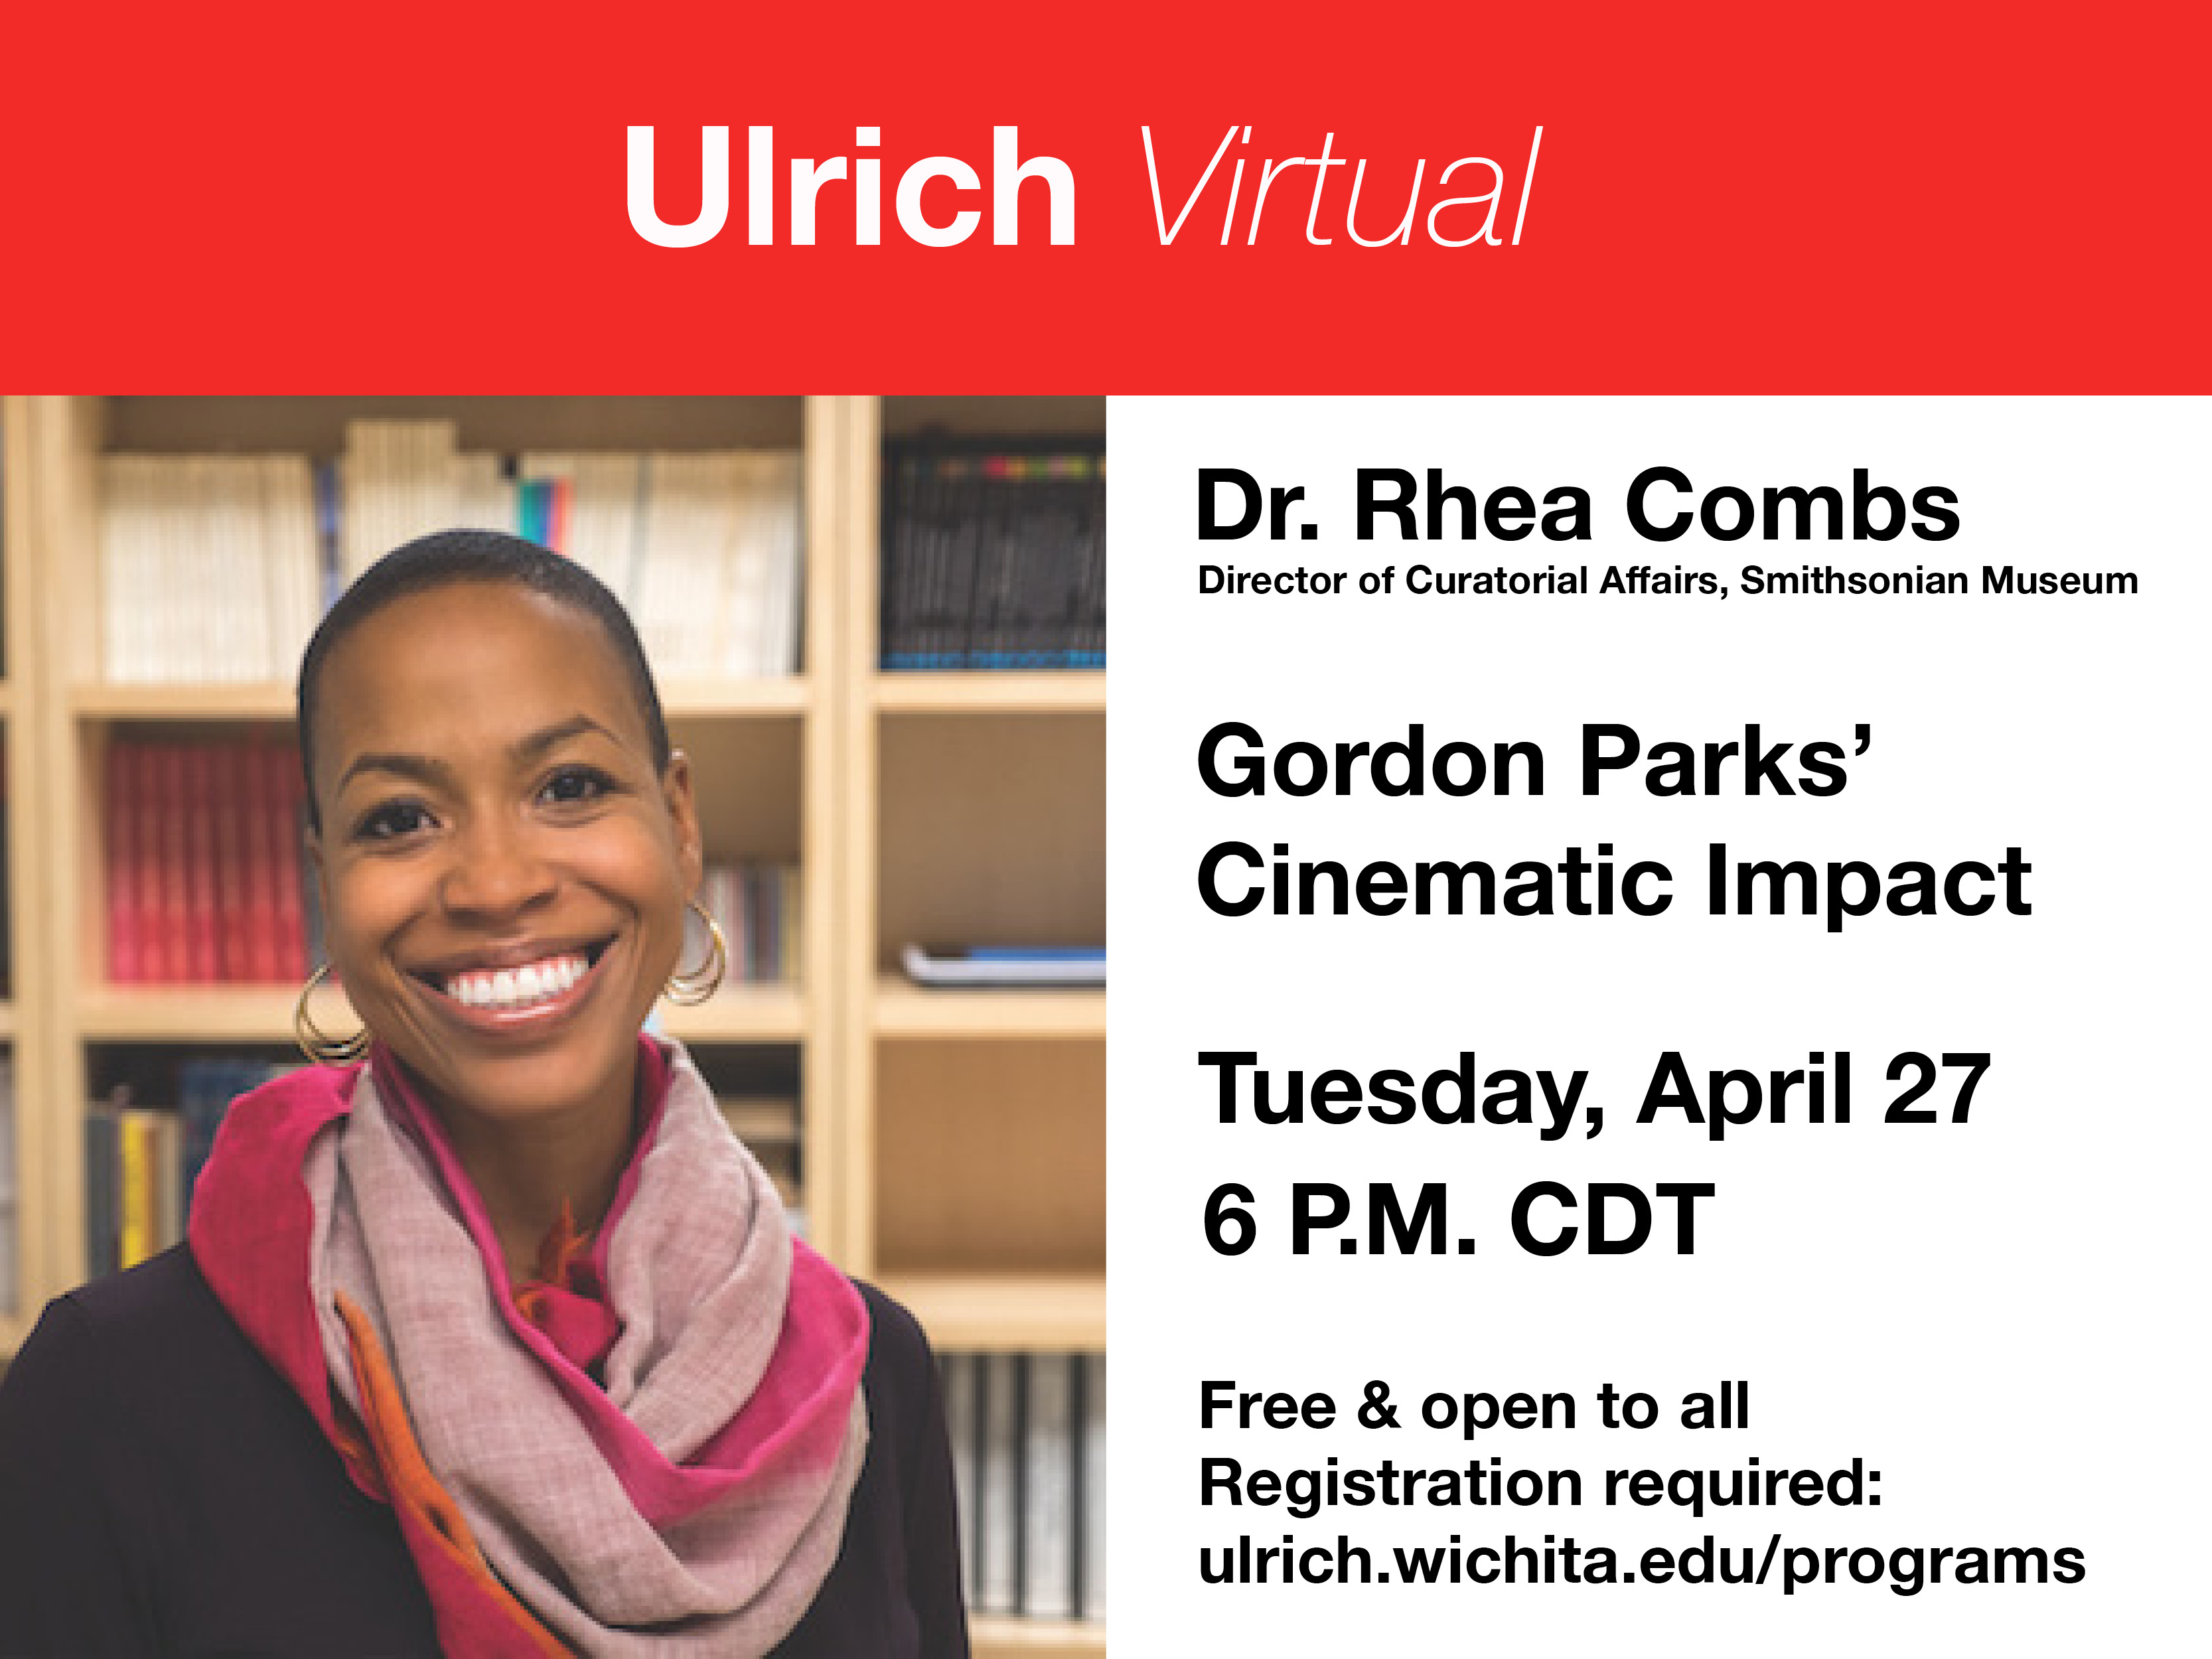 Ulrich Virtual. Dr. Rhea Combs, Director of Curatorial Affairs, Smithsonian Museum. Gordon Parks' cinematic impact. Tuesday, April 27, 6 P.M. CDT. Free and open to all. Registration required: ulrich.wichita.edu/programs